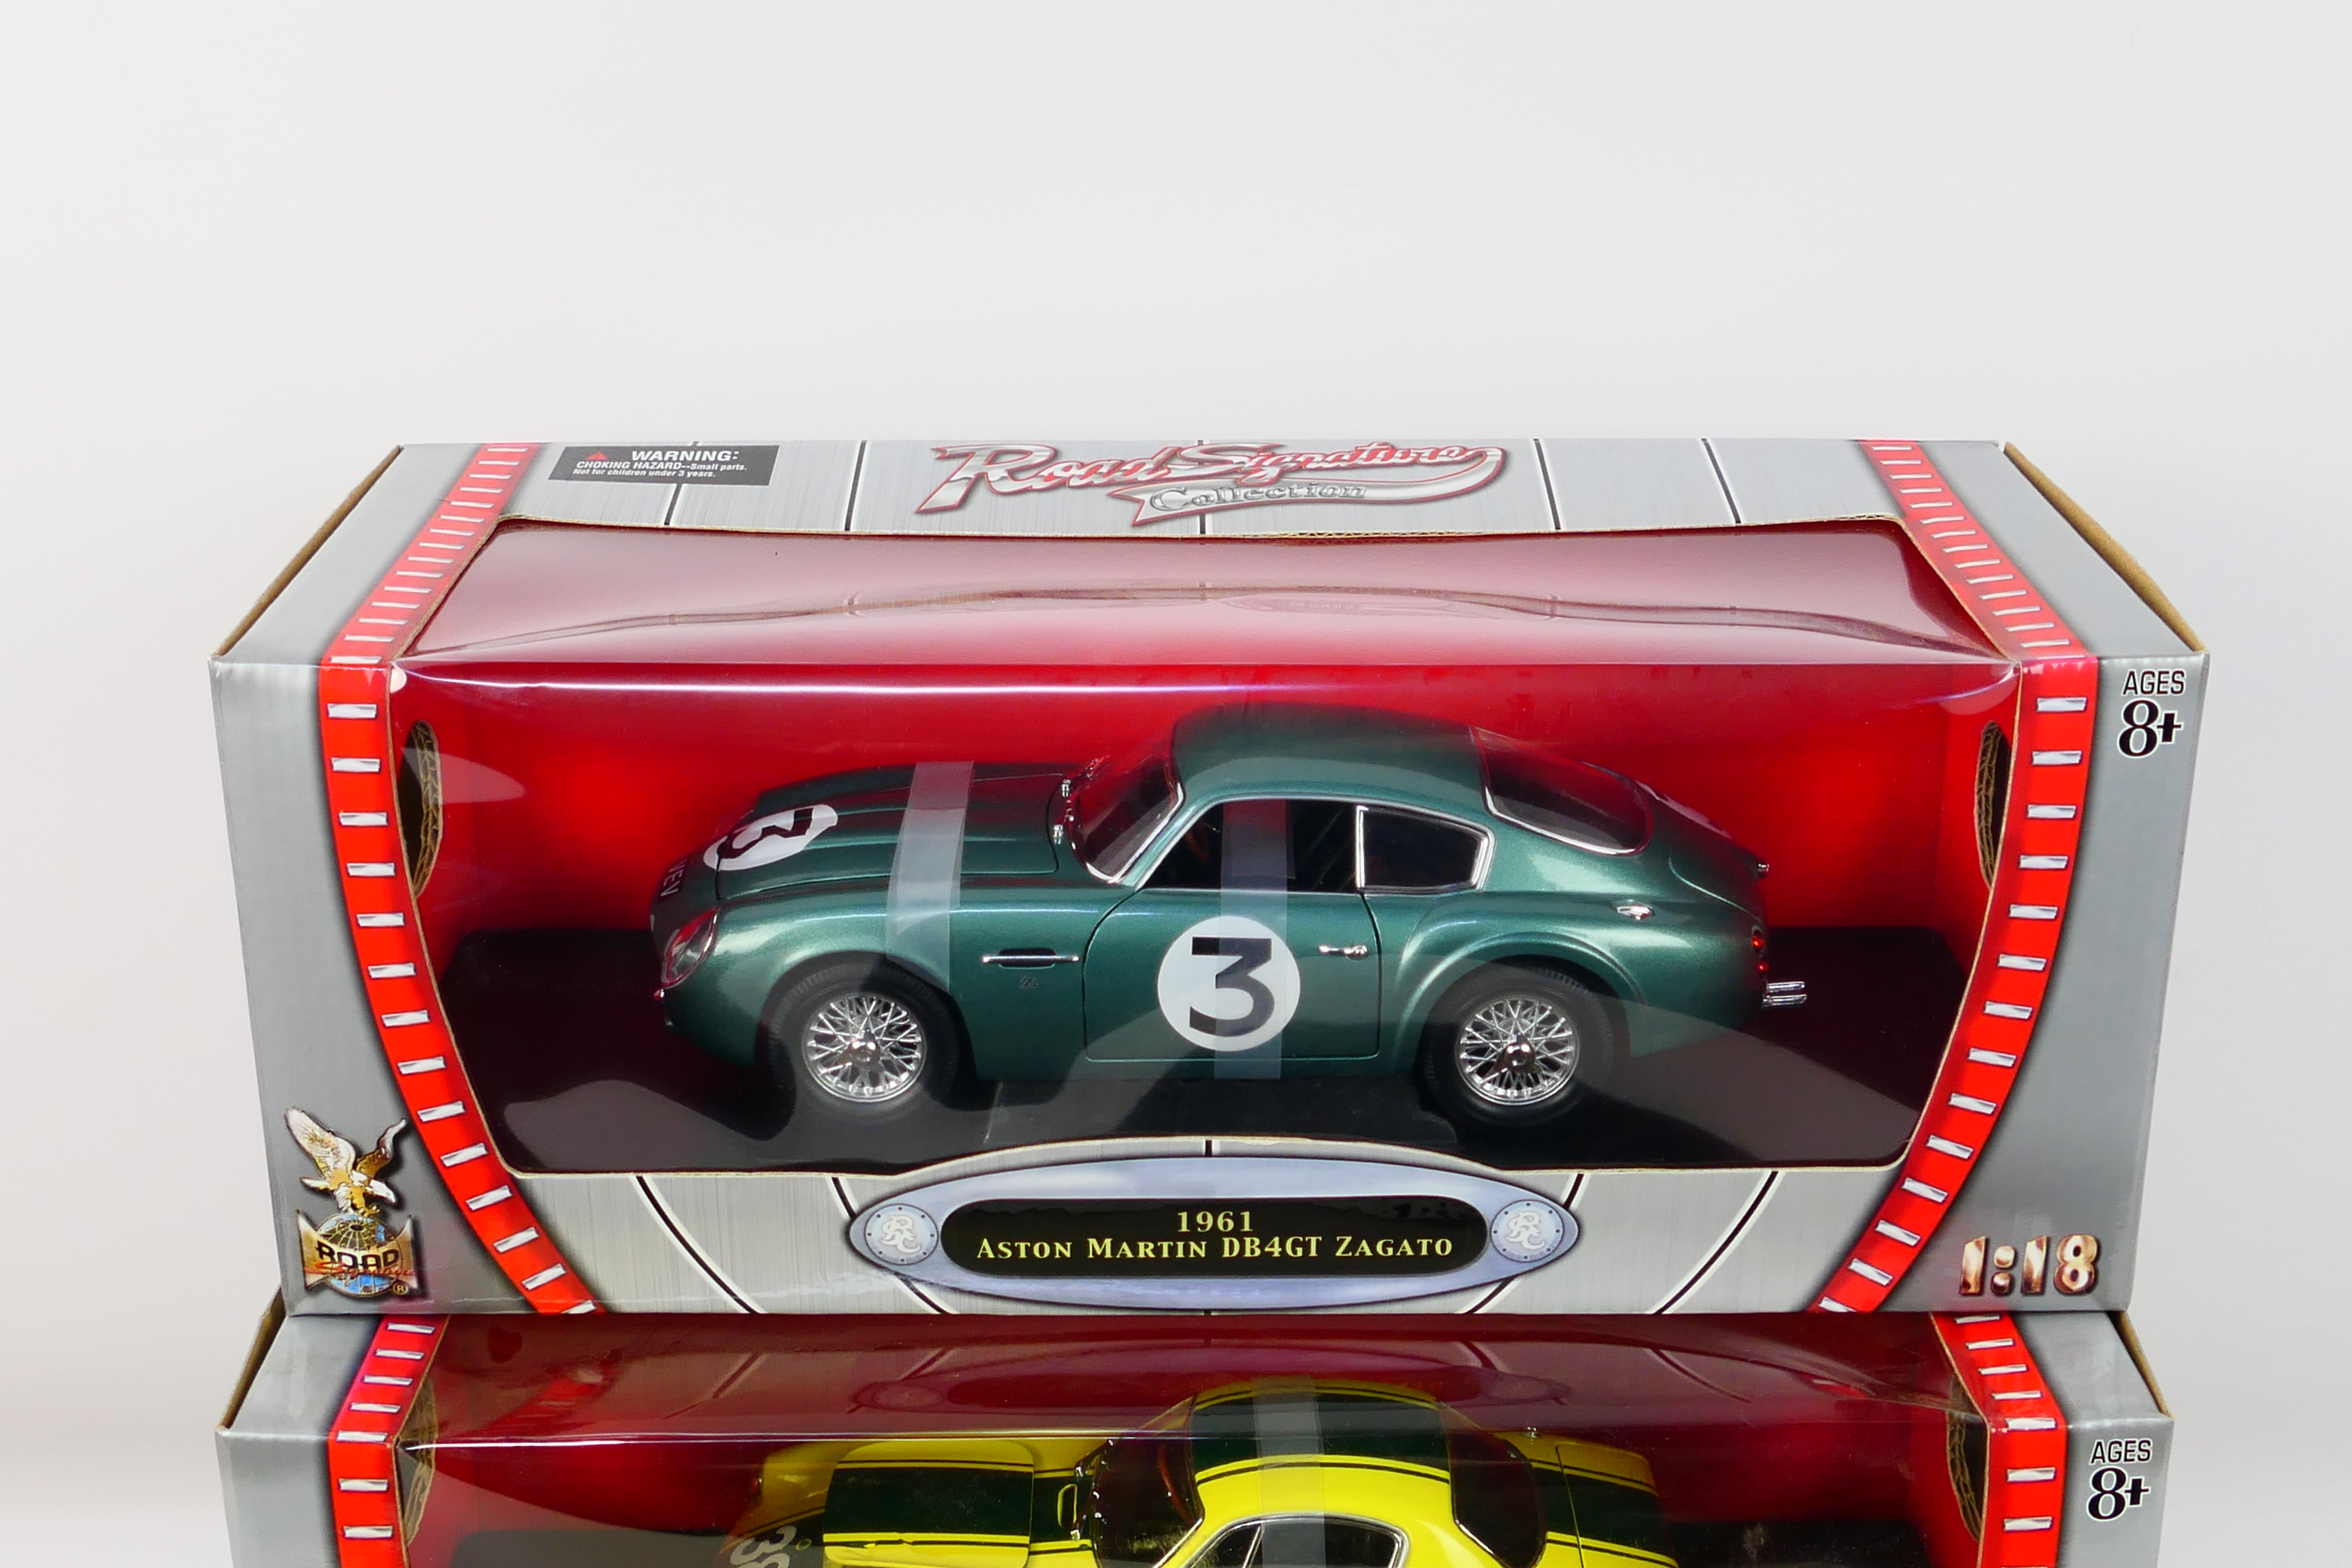 Road Signature - Two boxed 1:18 scale Road Signature diecast model cars. - Image 2 of 3